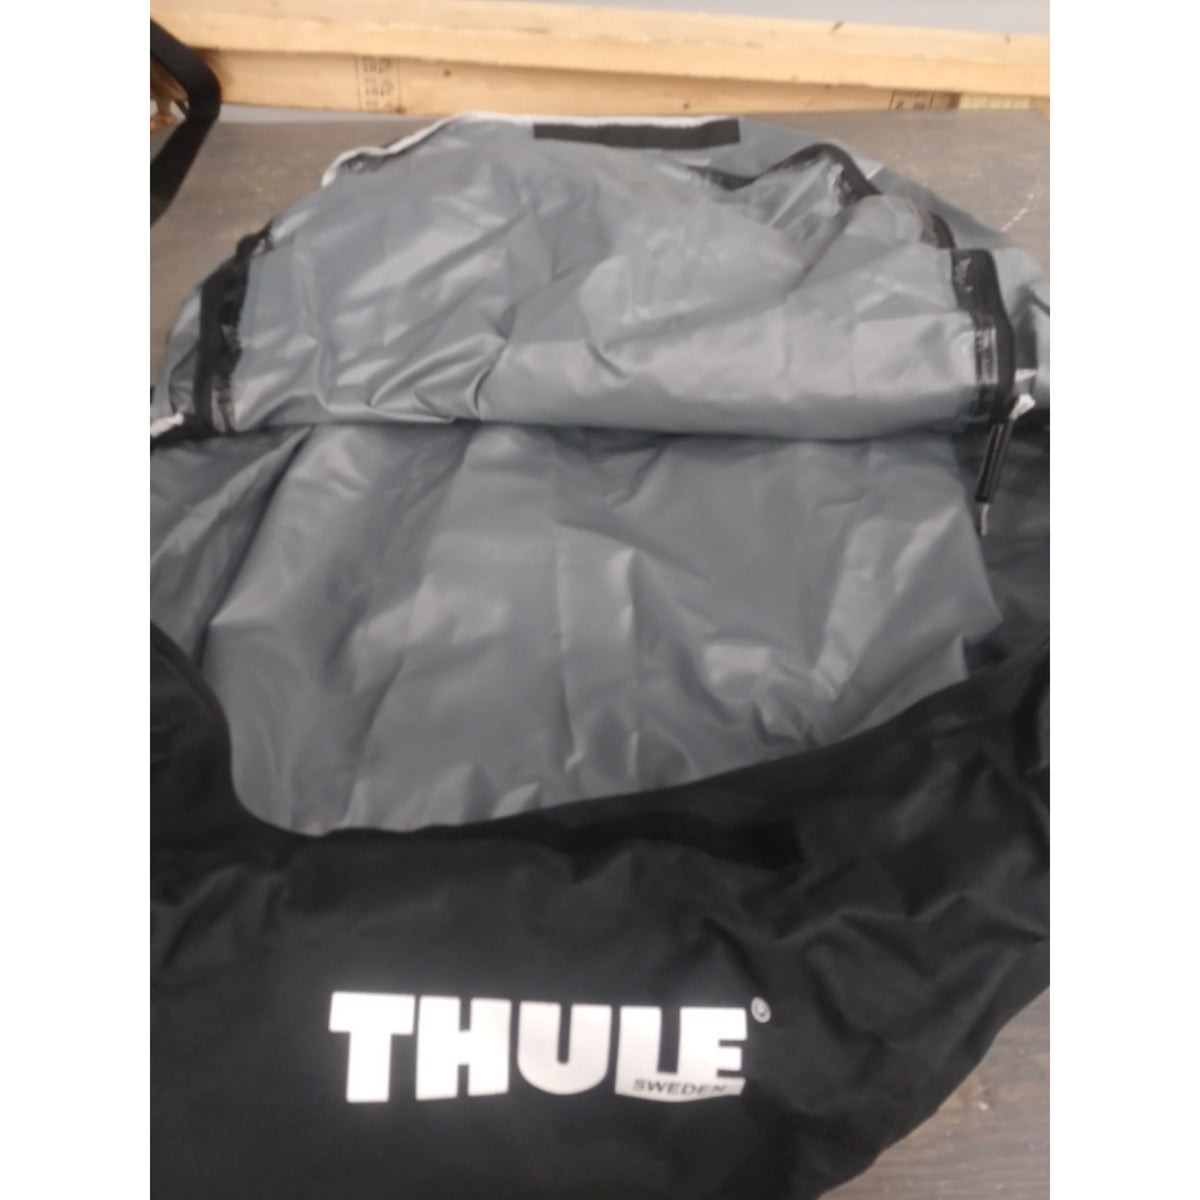 Thule Outbound Cargo Bag - Used - Acceptable